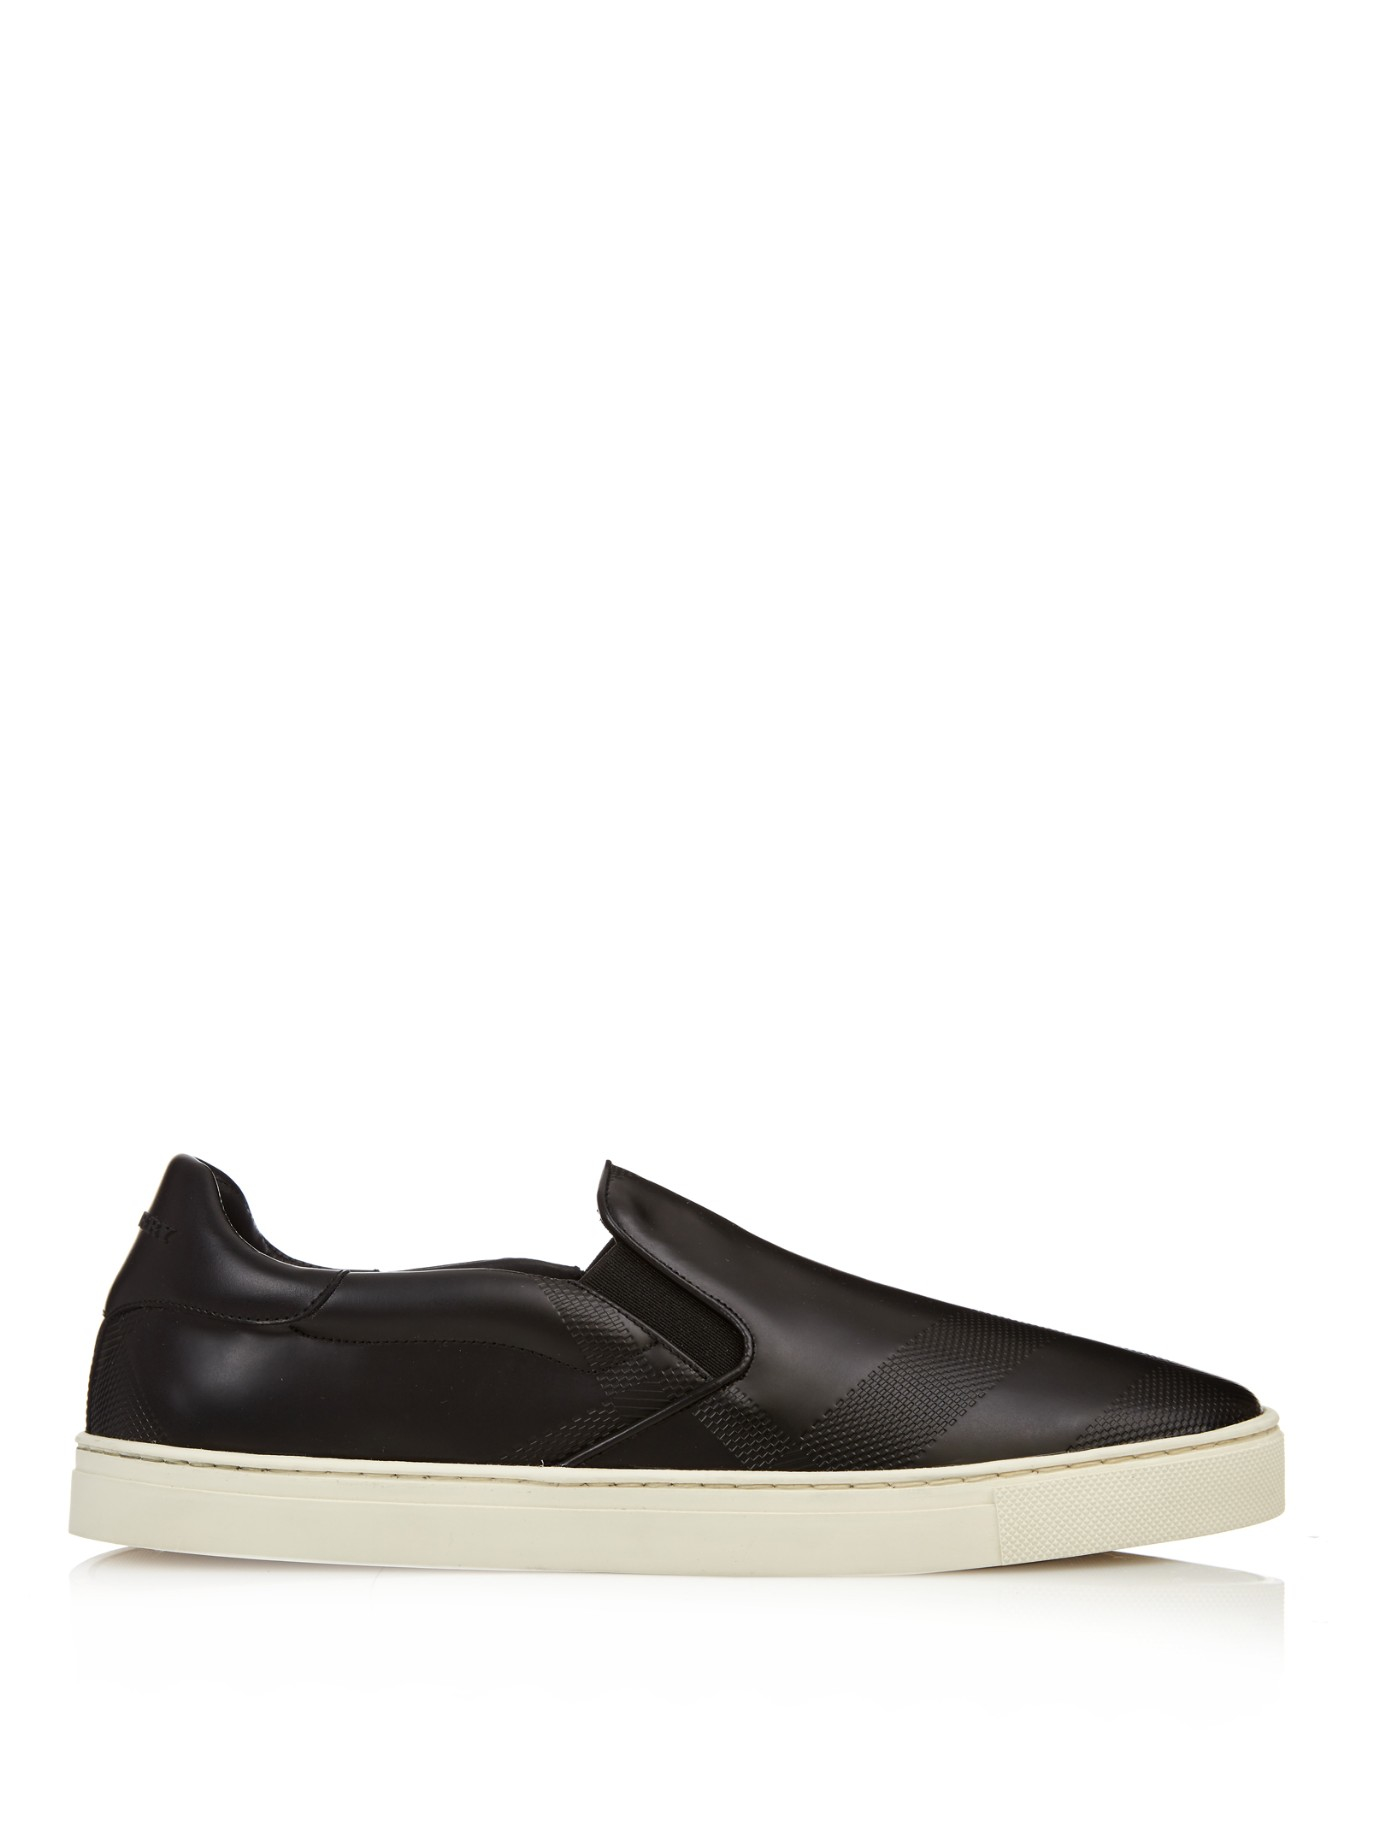 Burberry Check-embossed Leather Slip-on Trainers in Black Men